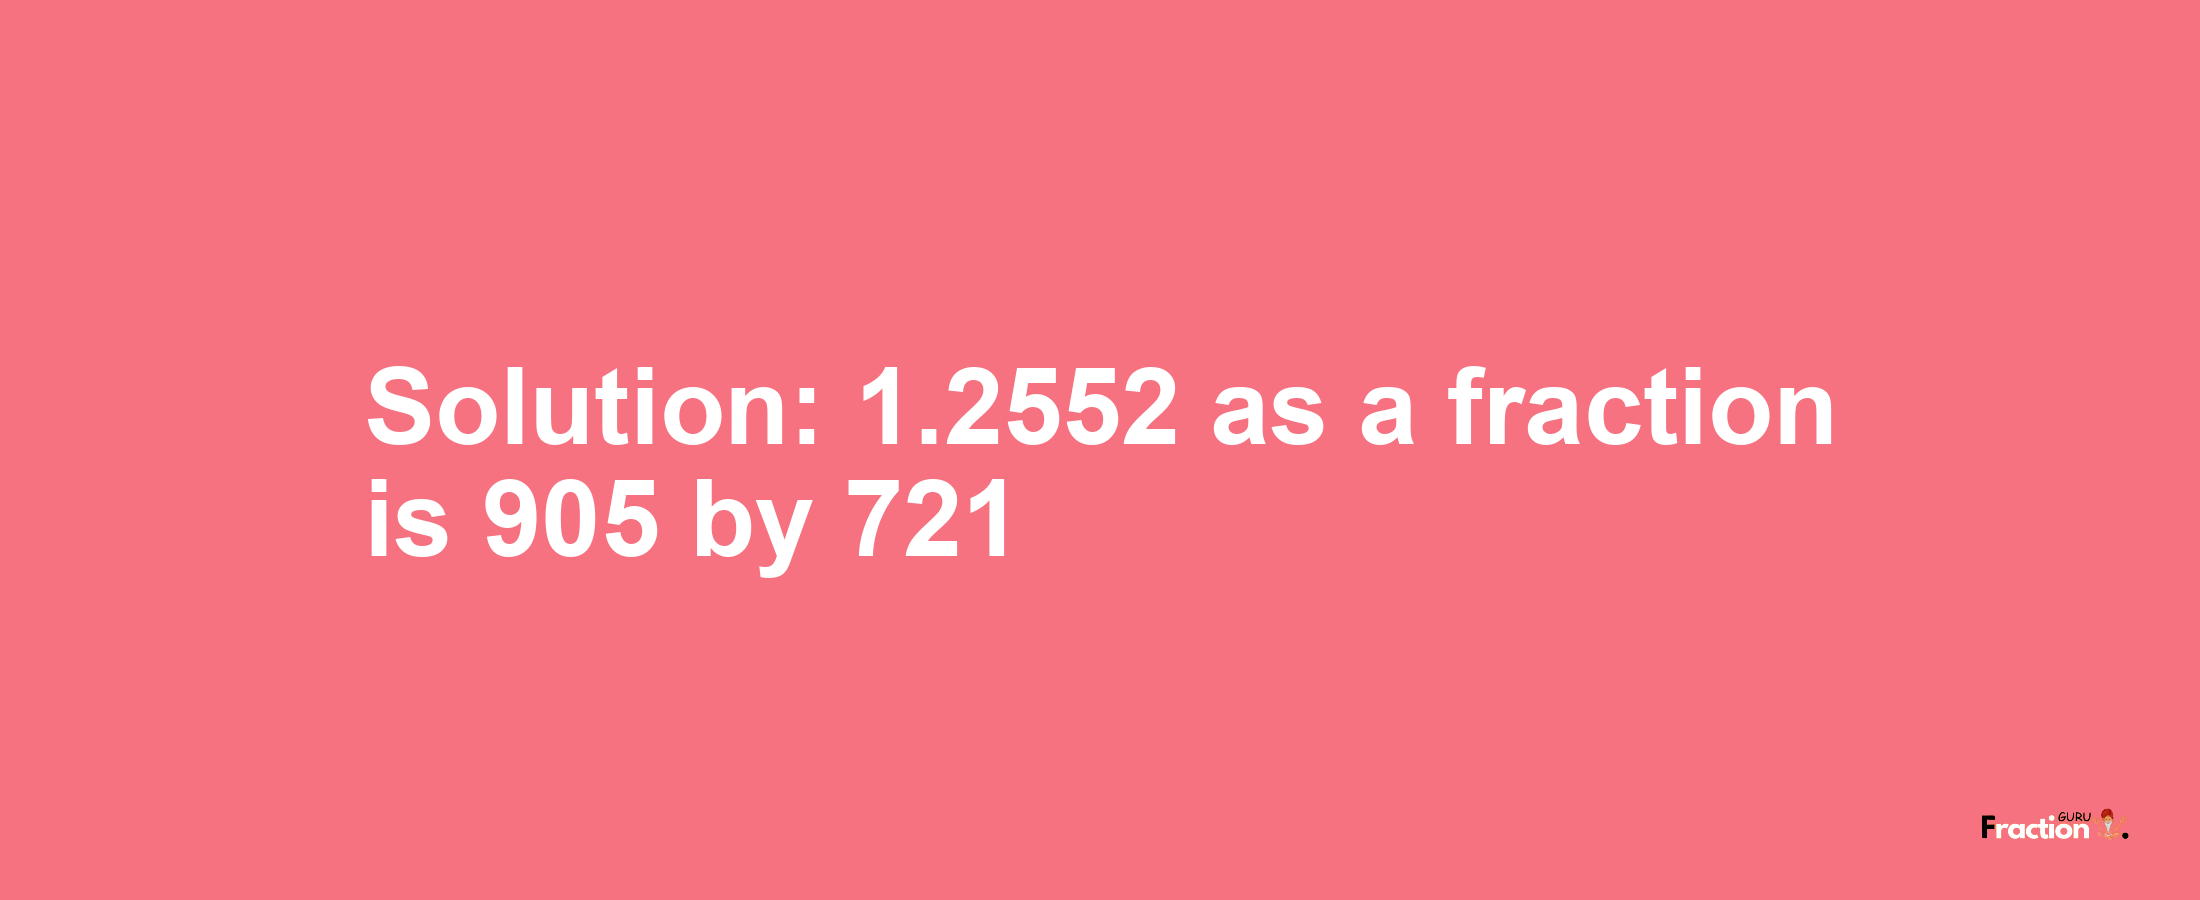 Solution:1.2552 as a fraction is 905/721